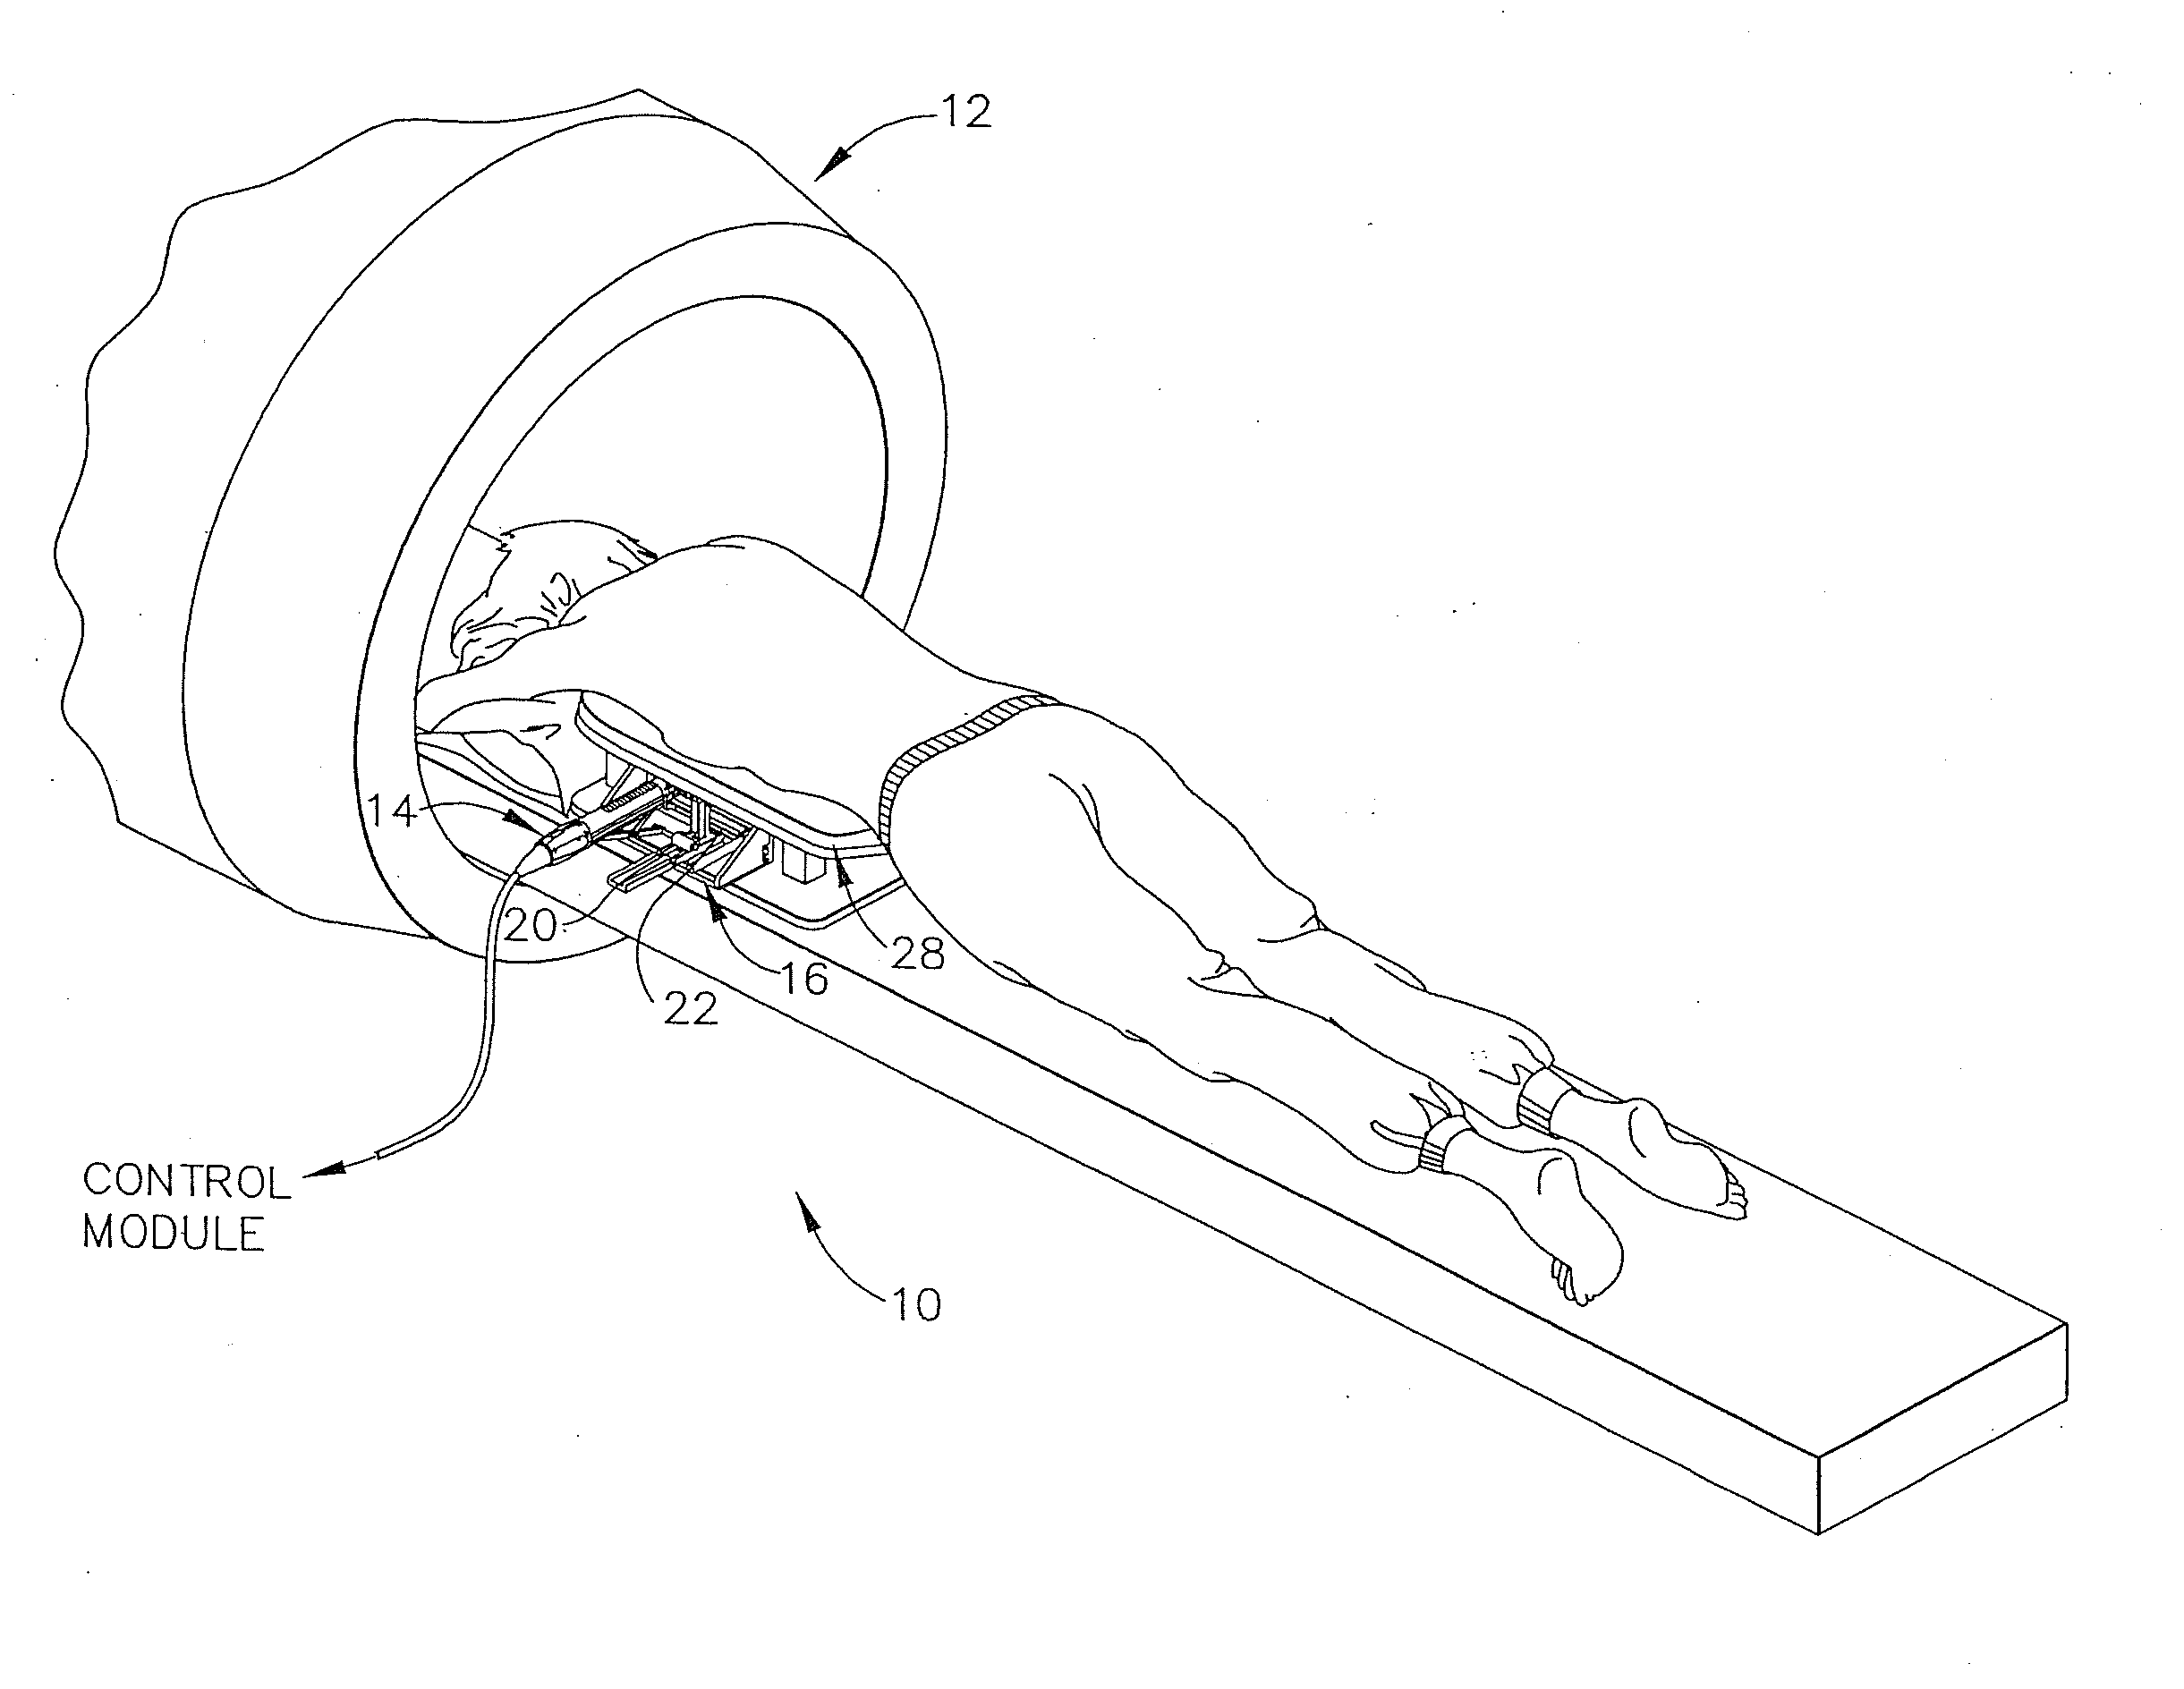 Breast compression assembly for use in MRI biopsy procedure